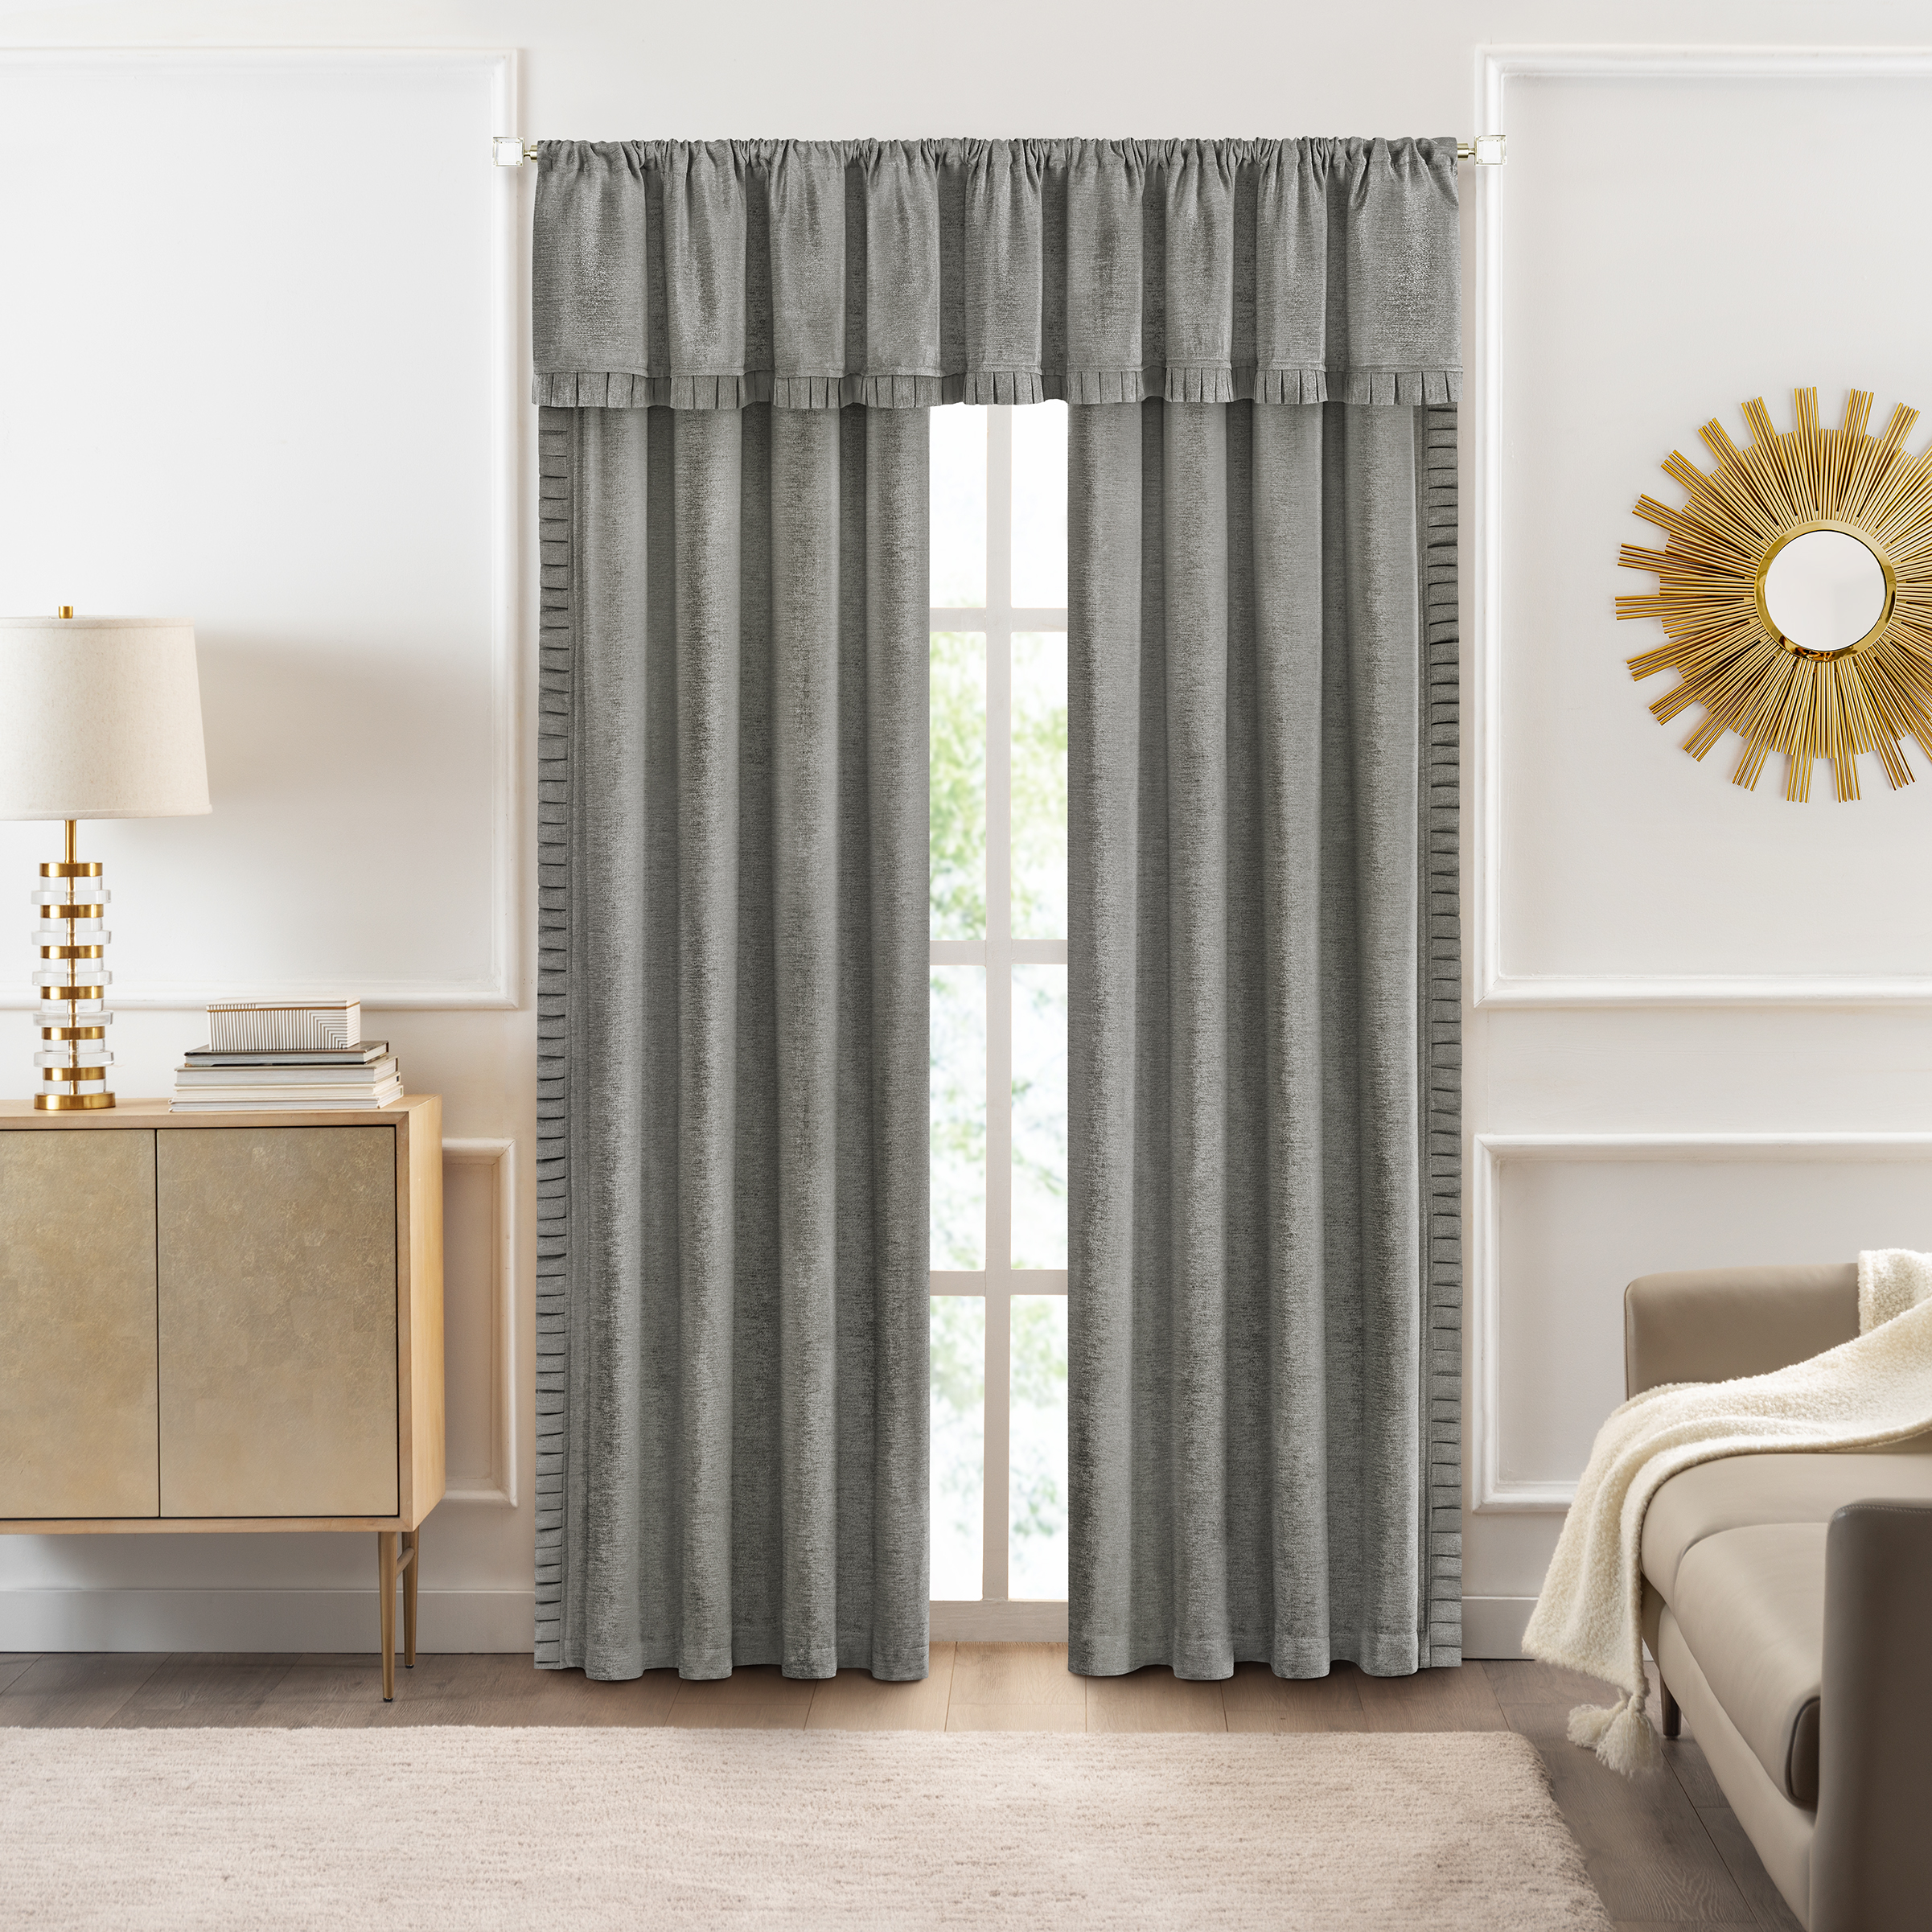 Achim Bordeaux Indoor Polyester Light Filtering Solid Curtain Panel, Silver, 52-in W x 63-in L - image 2 of 7